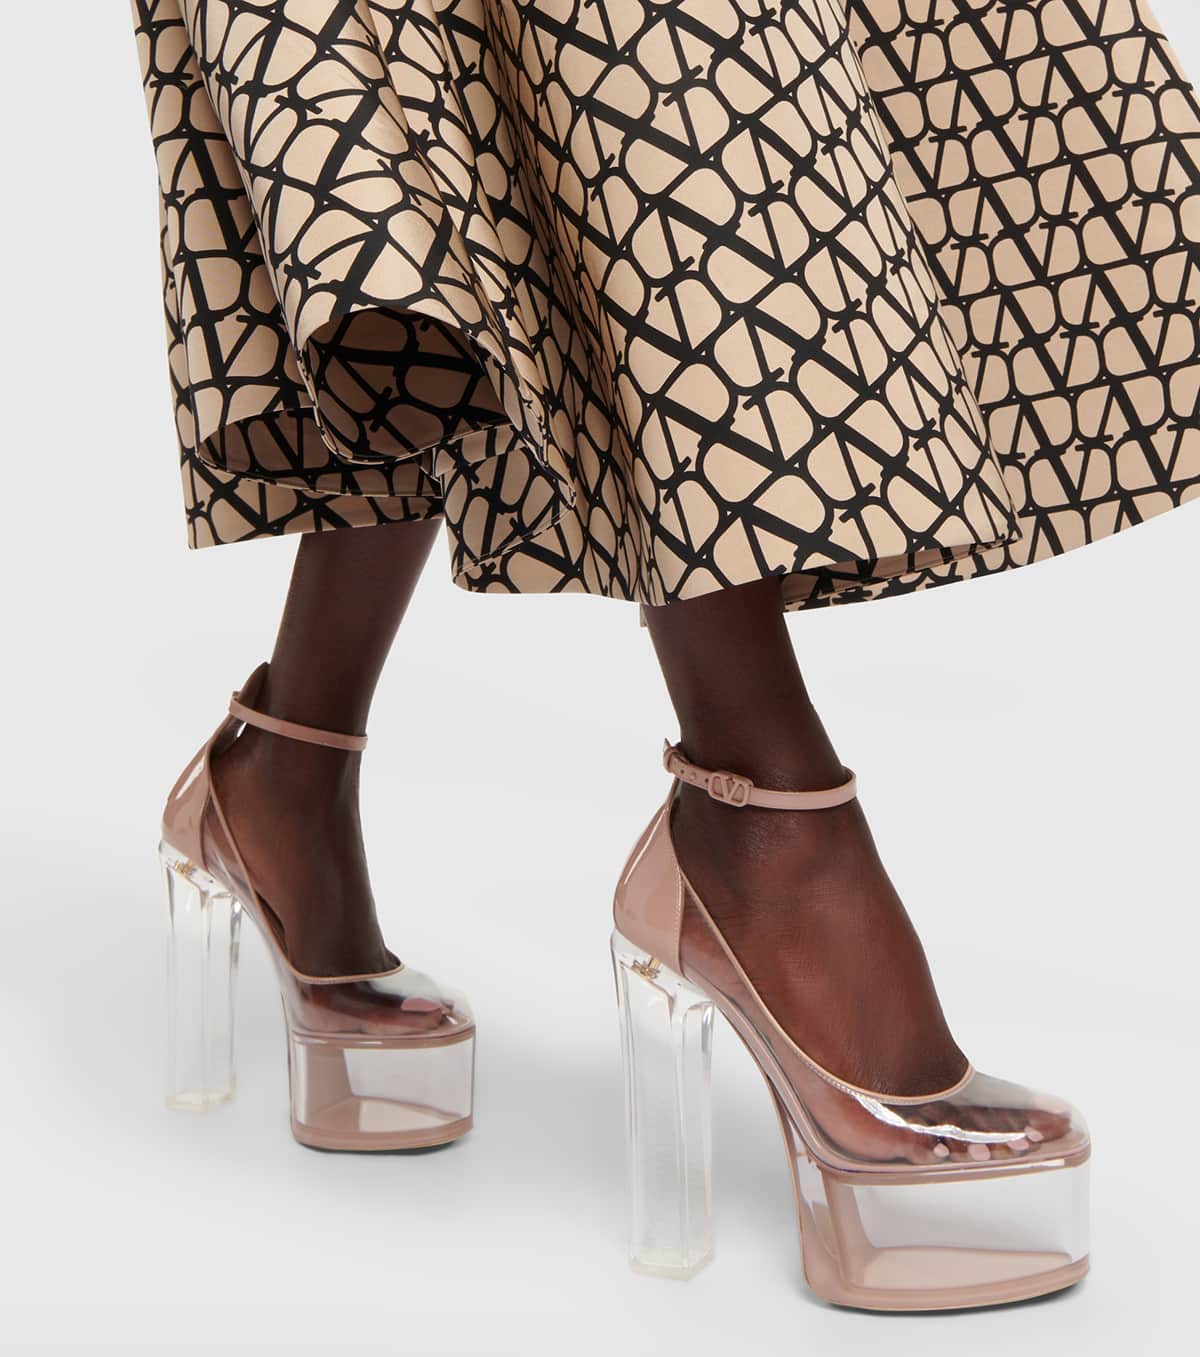 These Valentino Tan-Go pumps are made of polymer material with towering